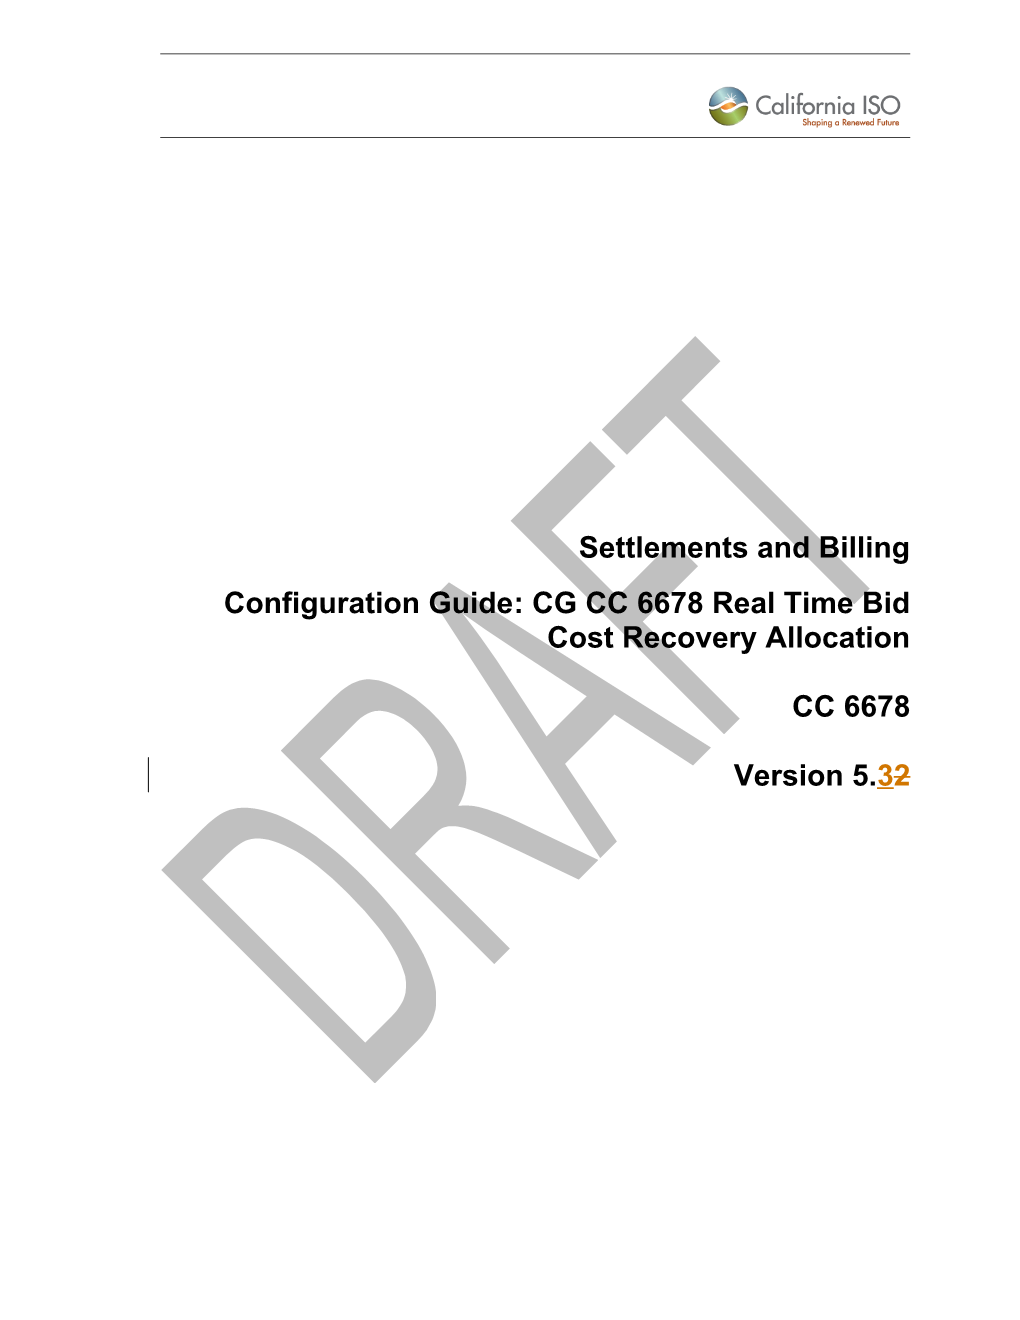 CG CC 6678 Real Time Bid Cost Recovery Allocation